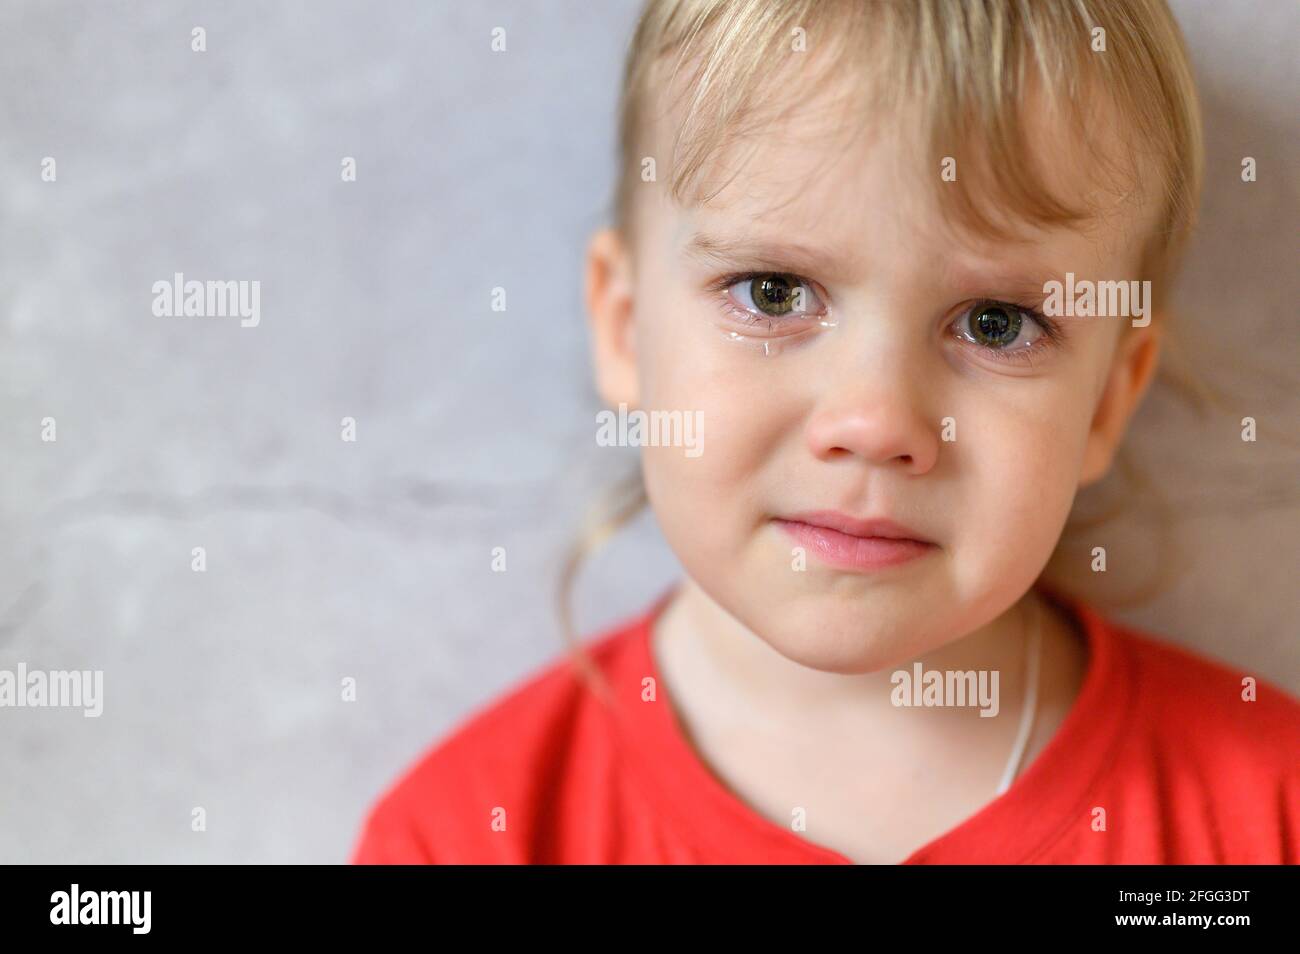 kid crying. the face of a cute little upset four year old baby boy in tears. children's grief. gray concrete wall background. space for text Stock Photo